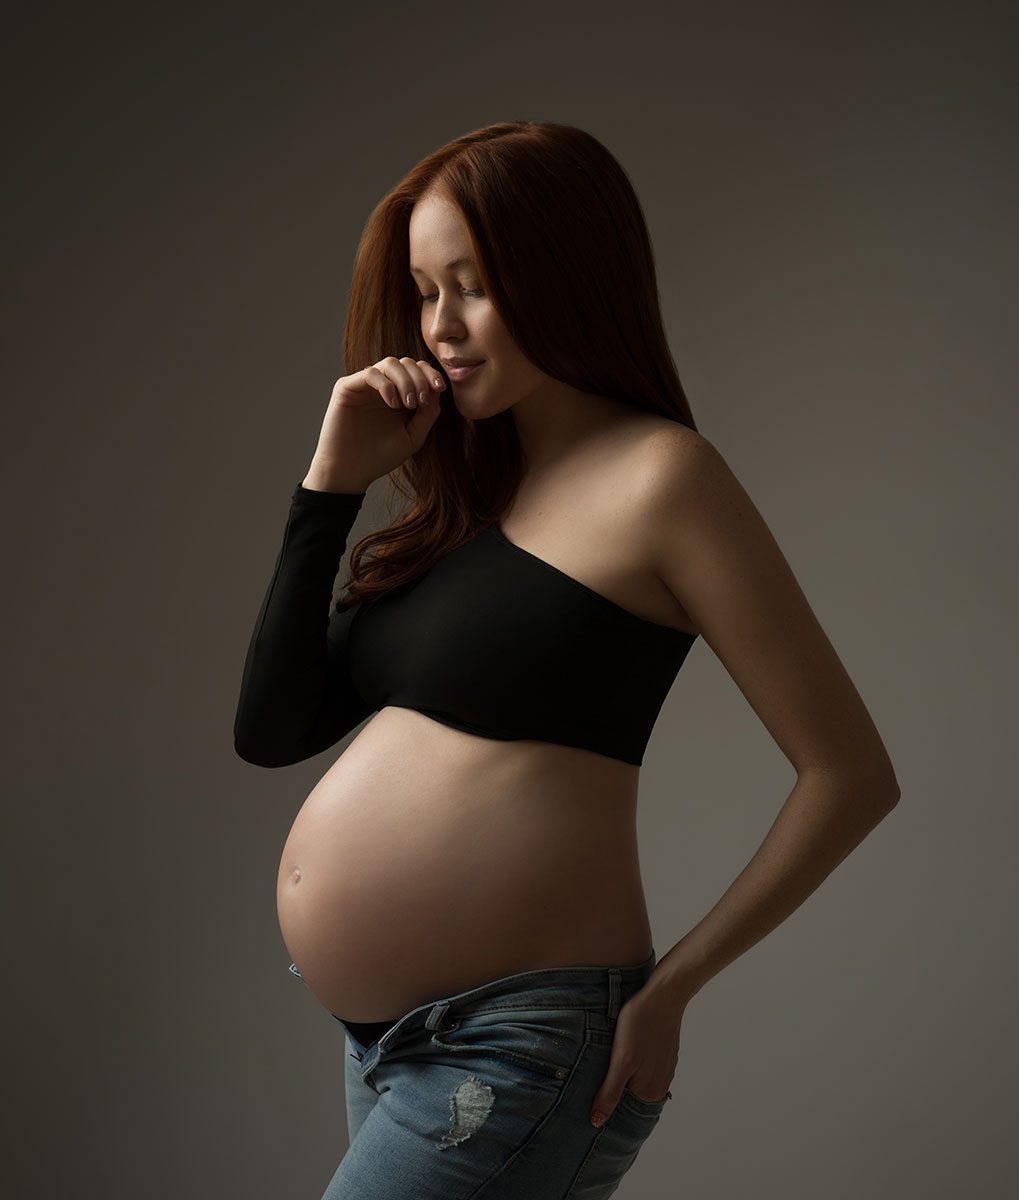 Pregnant model with red hair wearing jeans and a black crop top